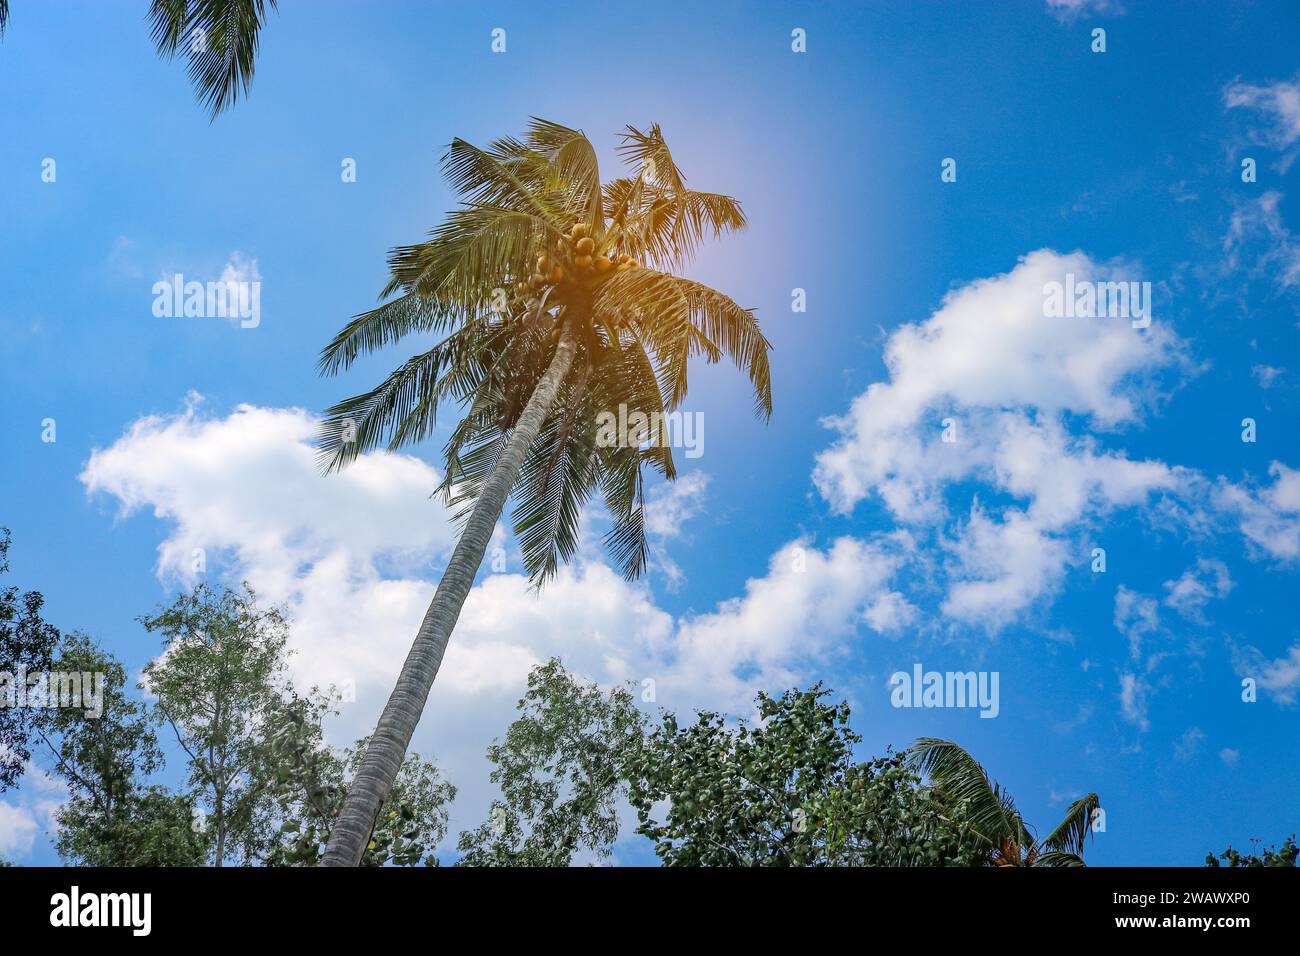 Coconut palm with heavy ripe nuts against the blue sky. Danger of falling coconuts. Stock Photo